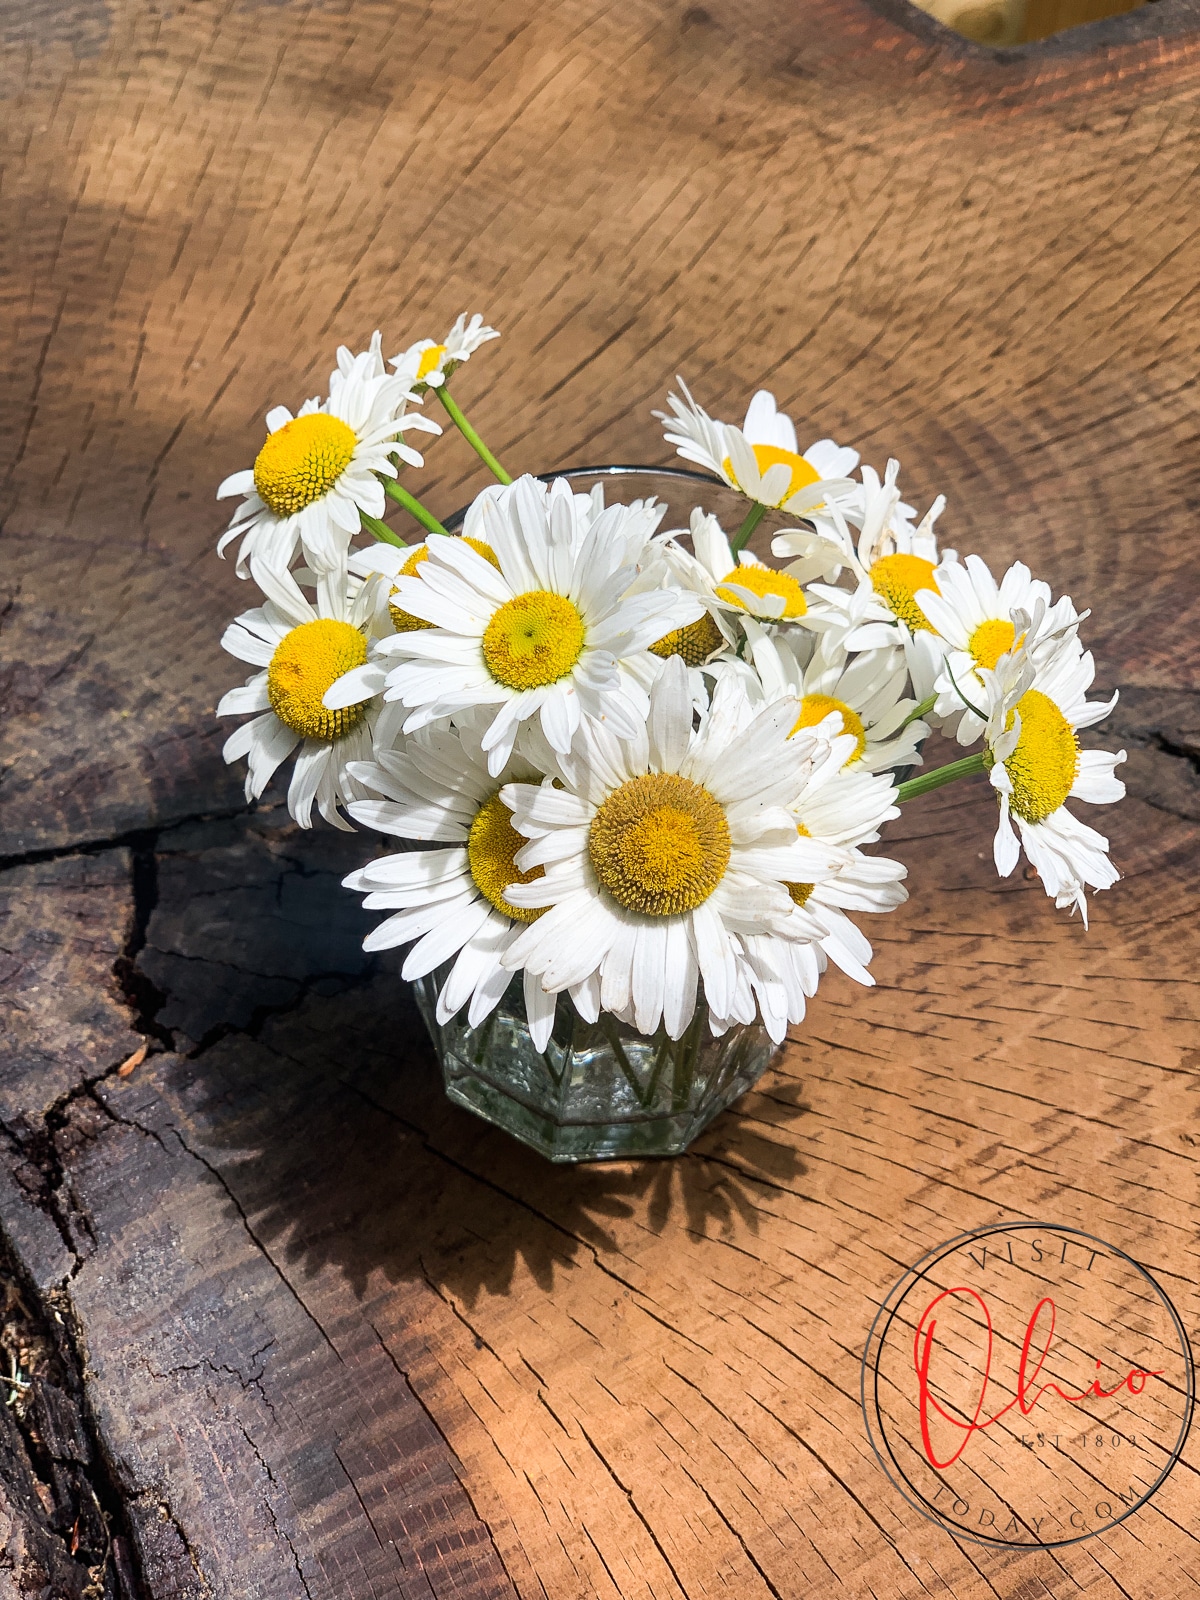 white daisies with yellow centers on a wooden stump